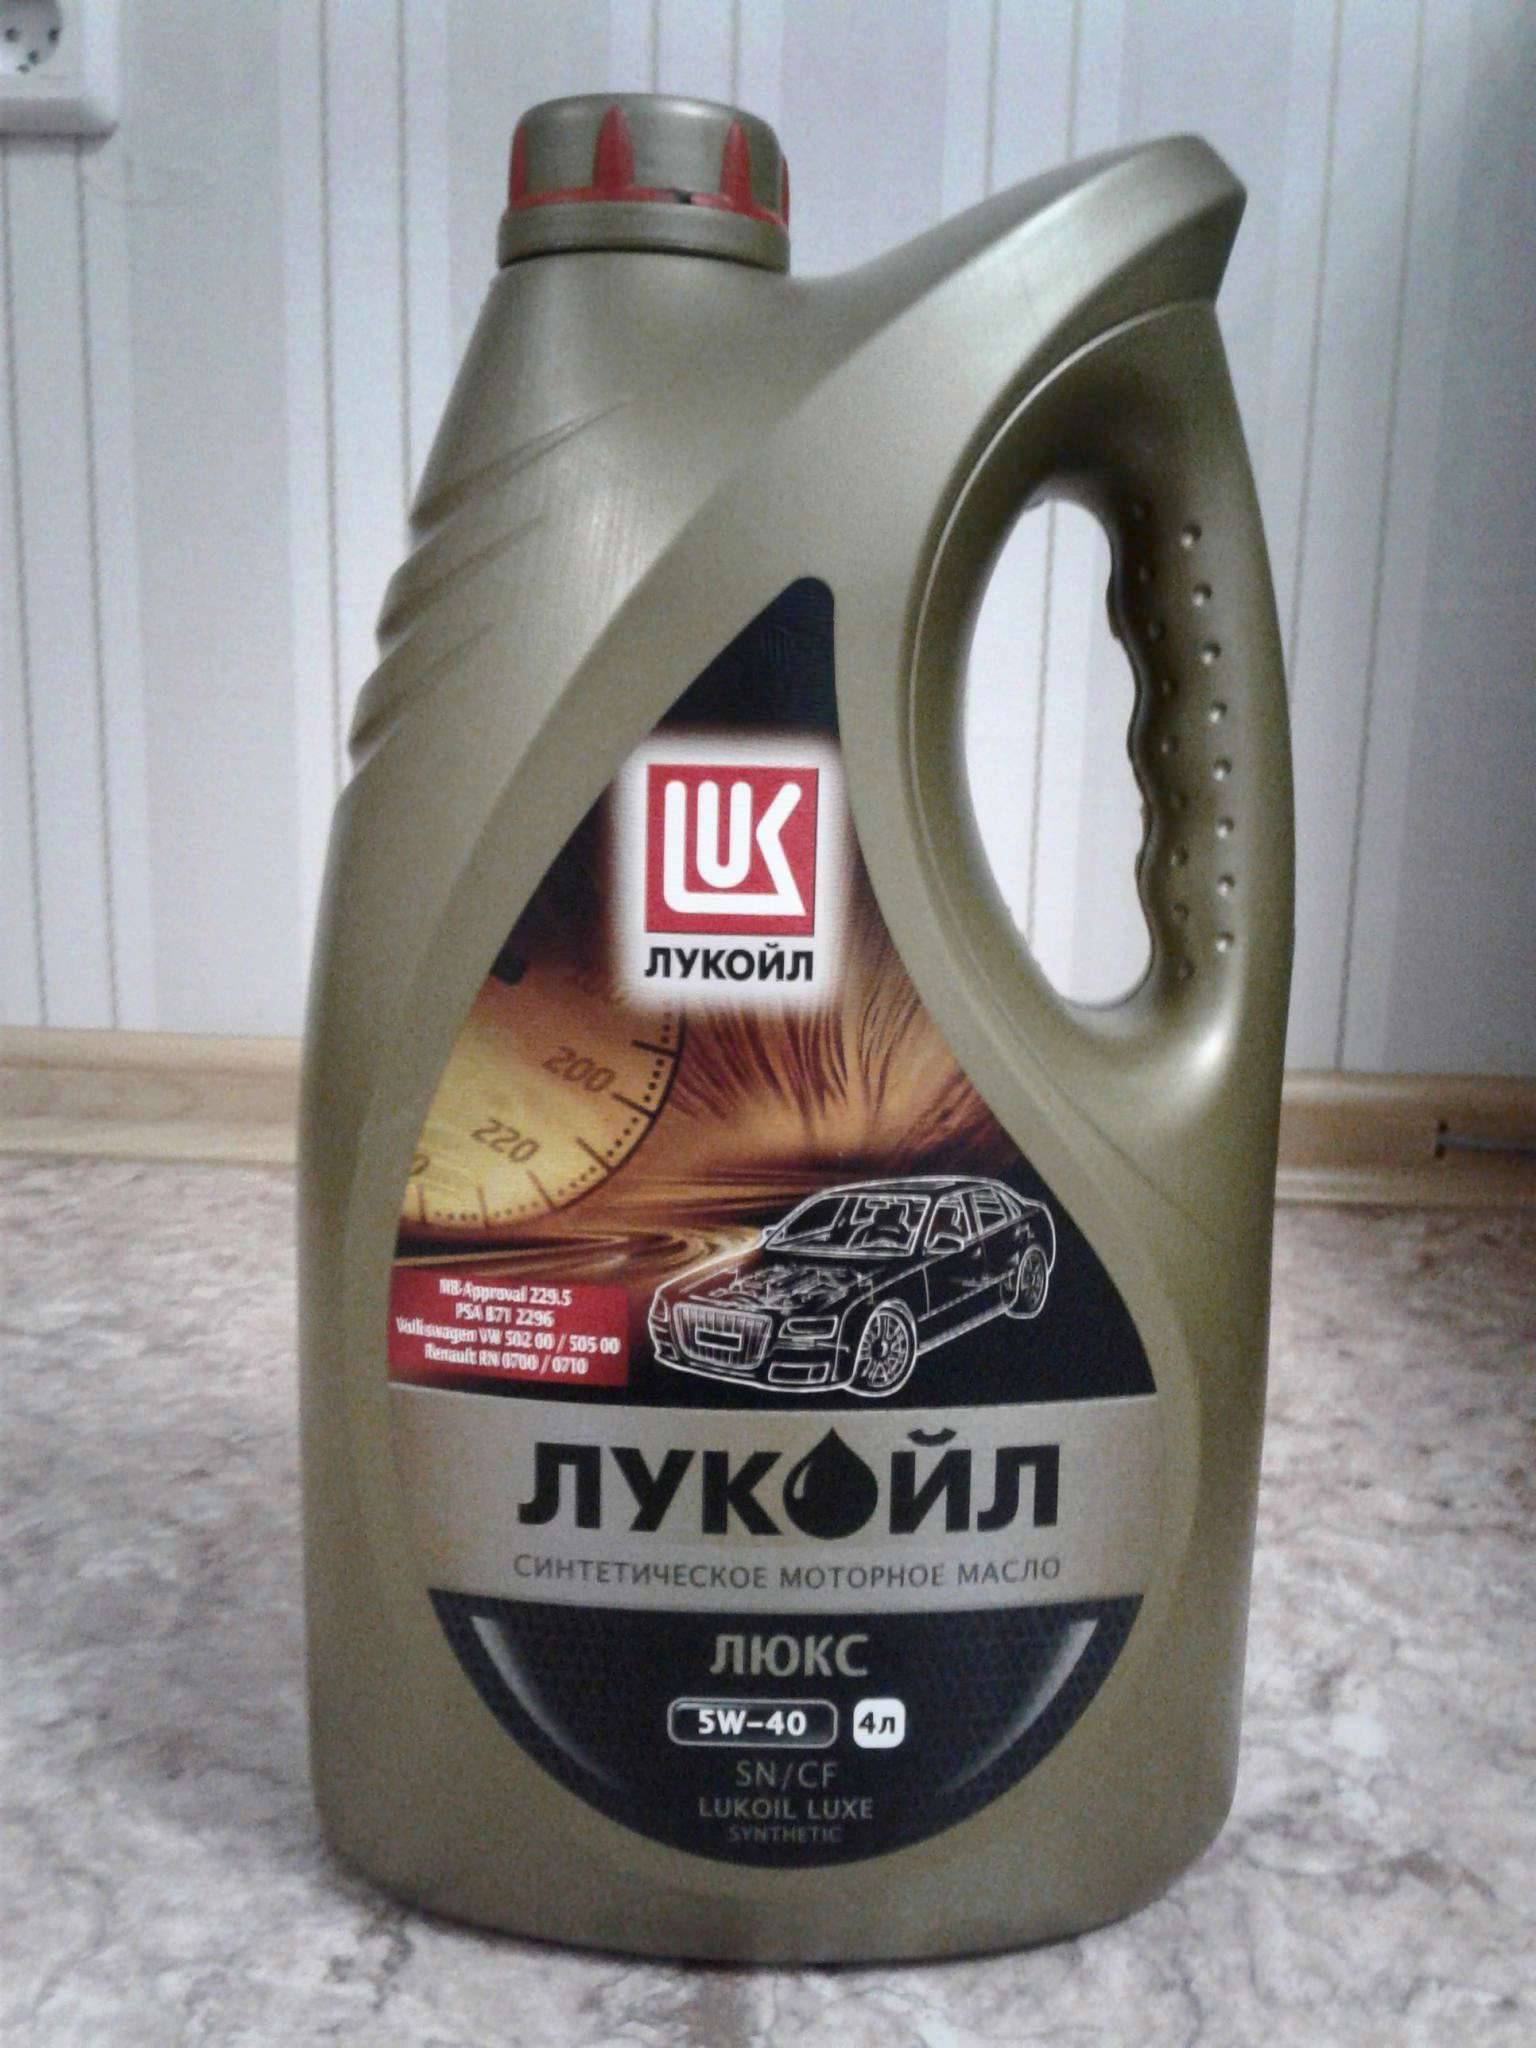 Масло лукойл 5w40 sn cf. Lukoil Luxe 5w-40. Лукойл Люкс 5w40 SN/CF. Лукойл Люкс 5w40 SN/CF 4л. SN/CF 5w-40 Lukoil.